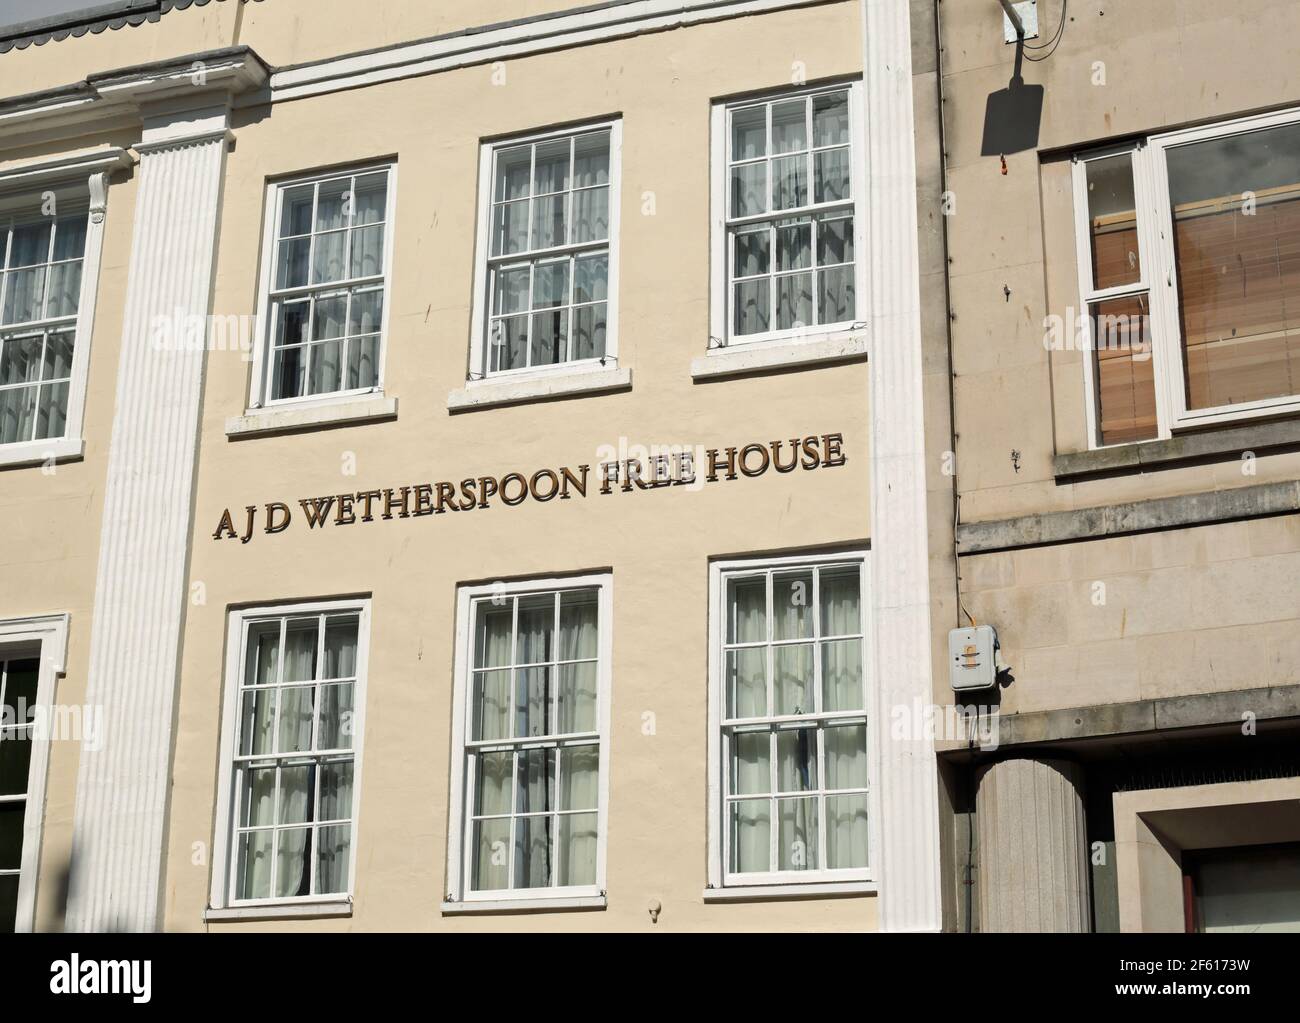 AJD Wetherspoon free house sign on building in Worcester, Worcestershire, England, UK. Stock Photo